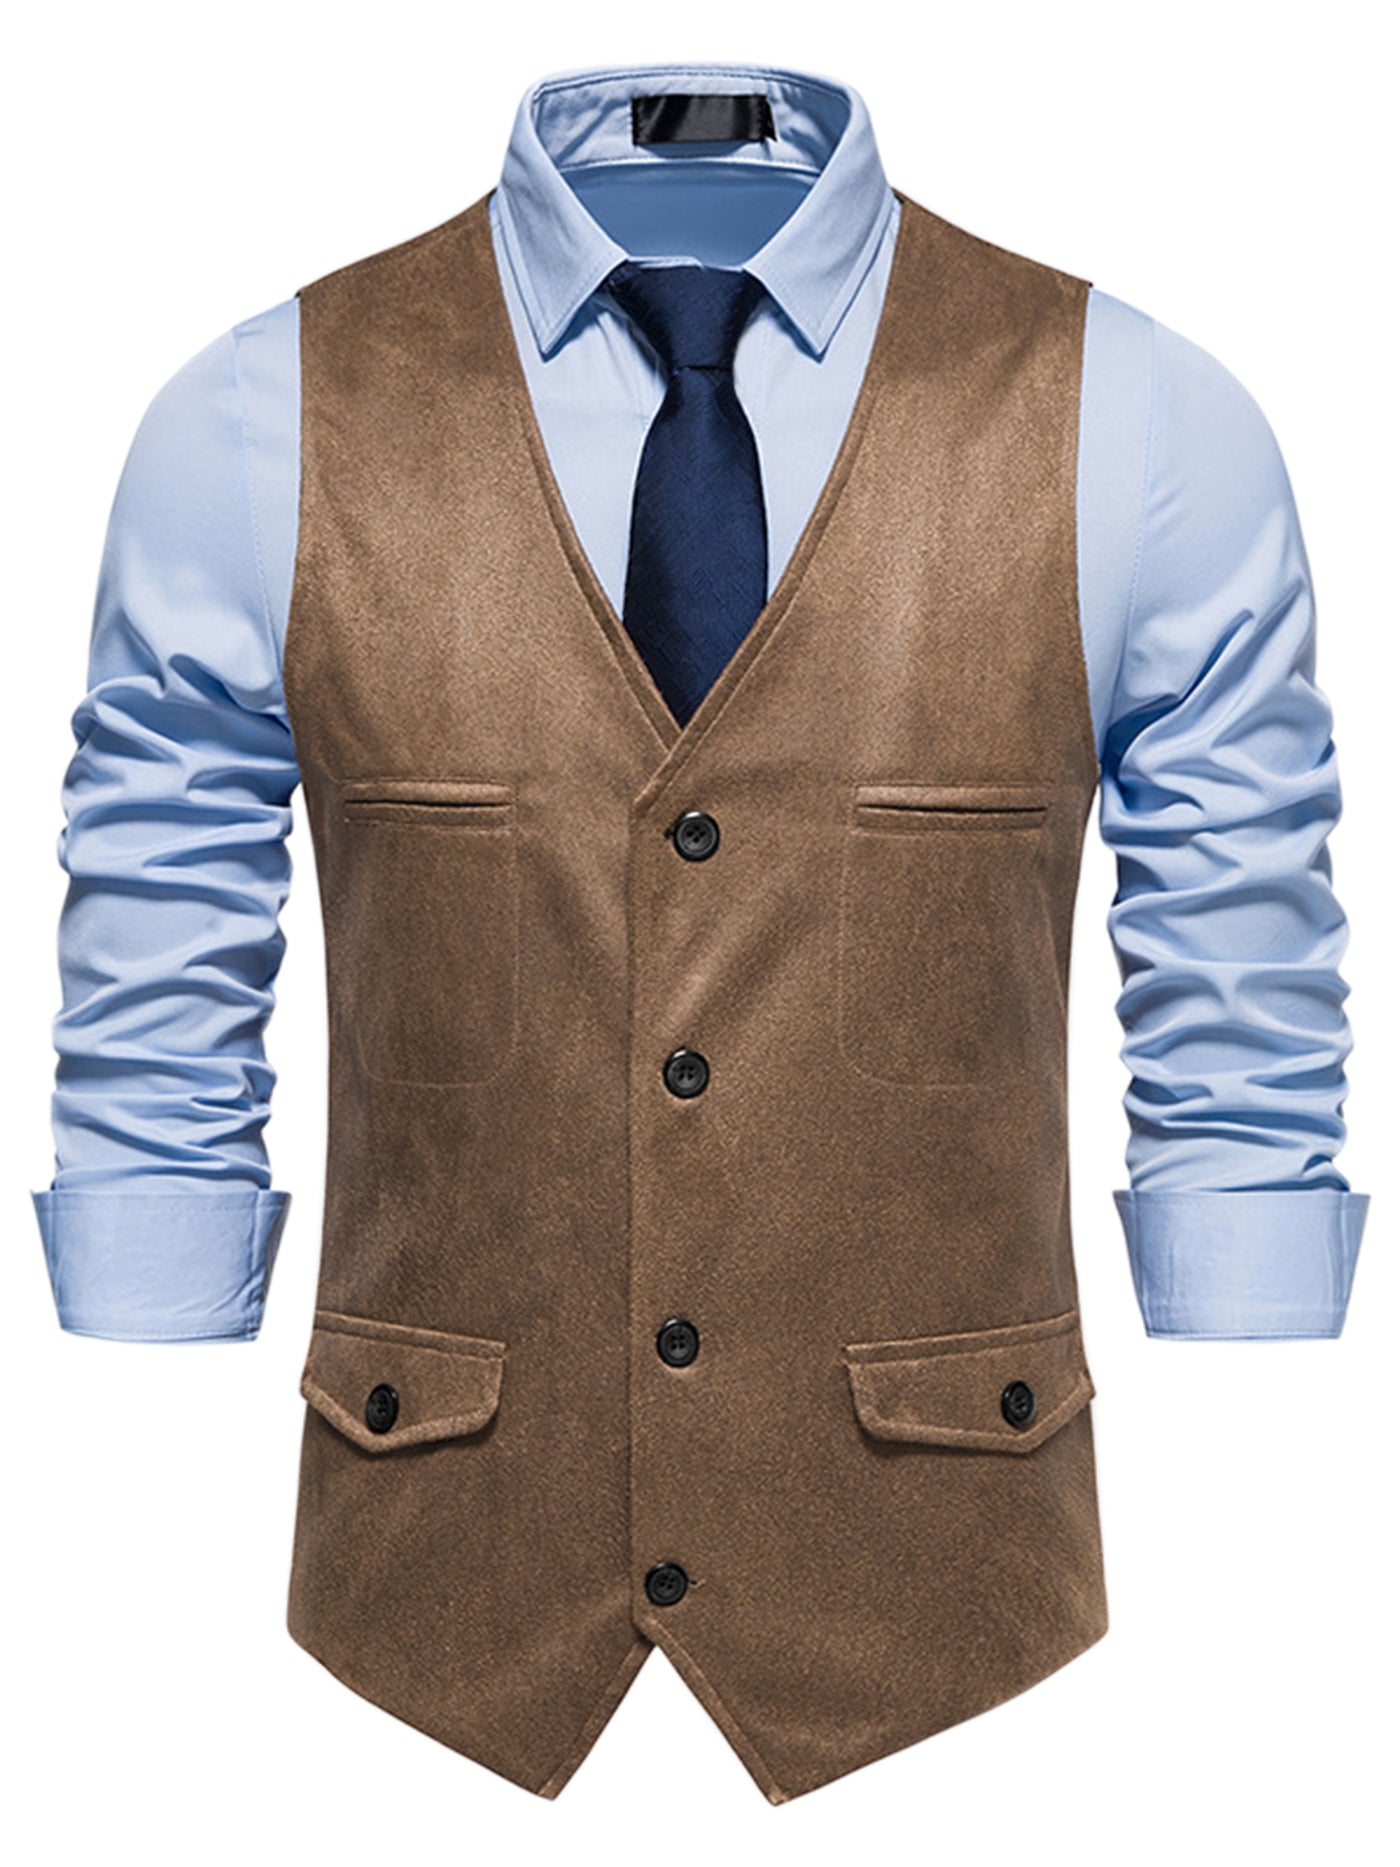 Bublédon Suede Waistcoat for Men's Single Breasted Slim Fit Business Western Suit Vests